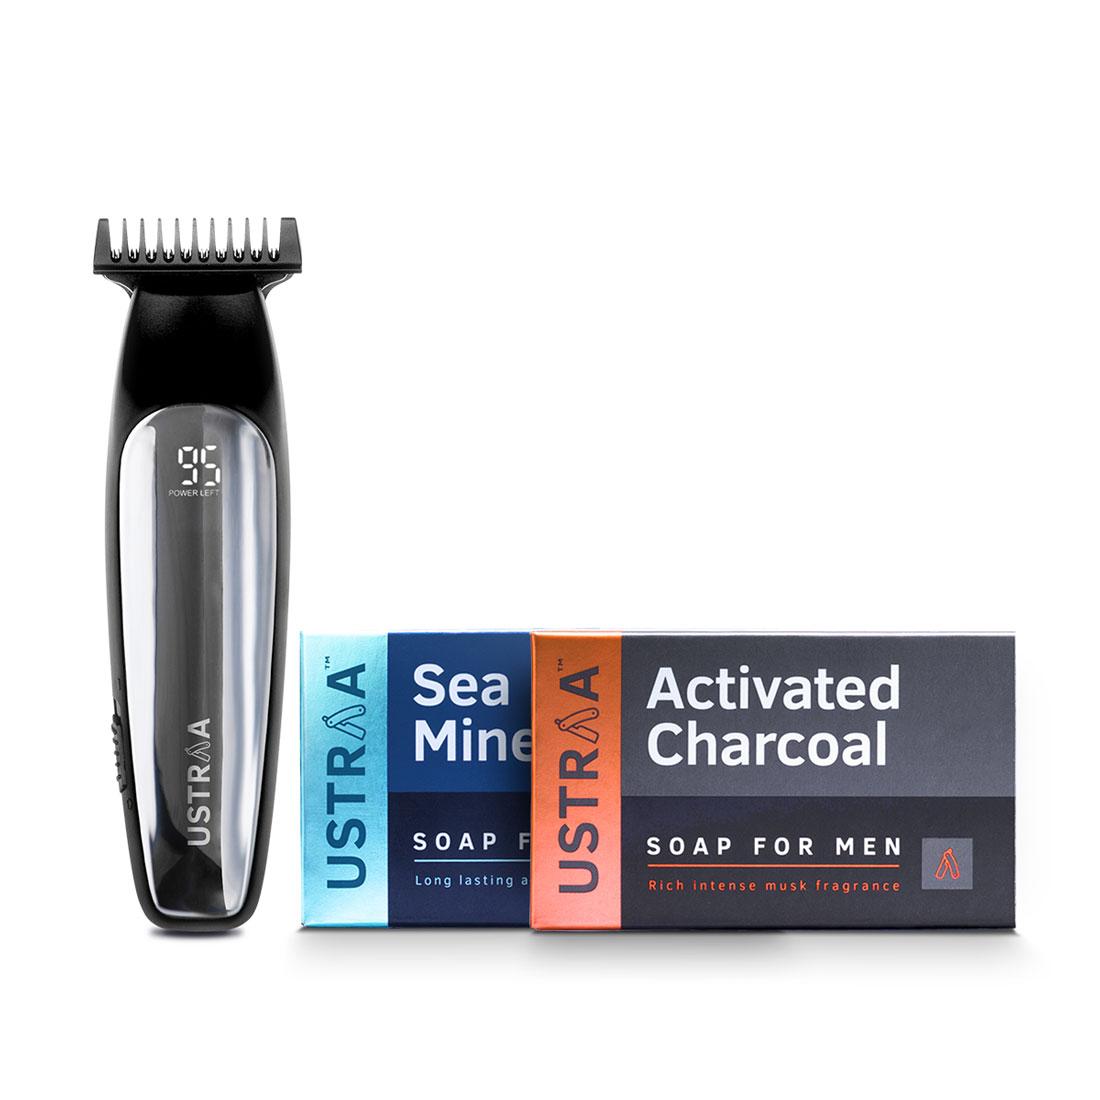 Ustraa Chrome - Lithium Powered Beard Trimmer and 2 New Ustraa Deo Soaps